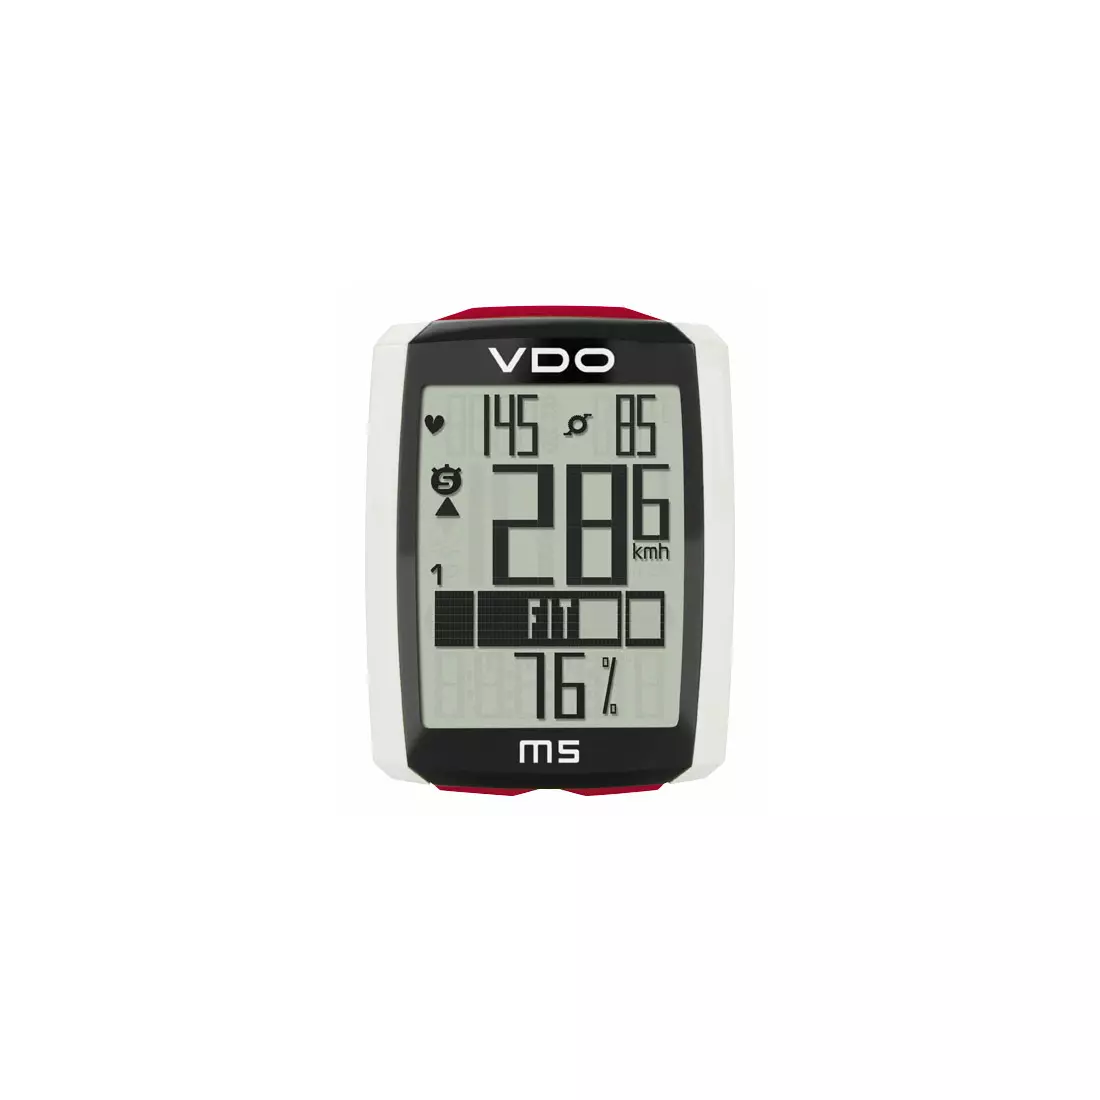 VDO - M5 - bicycle computer - wireless